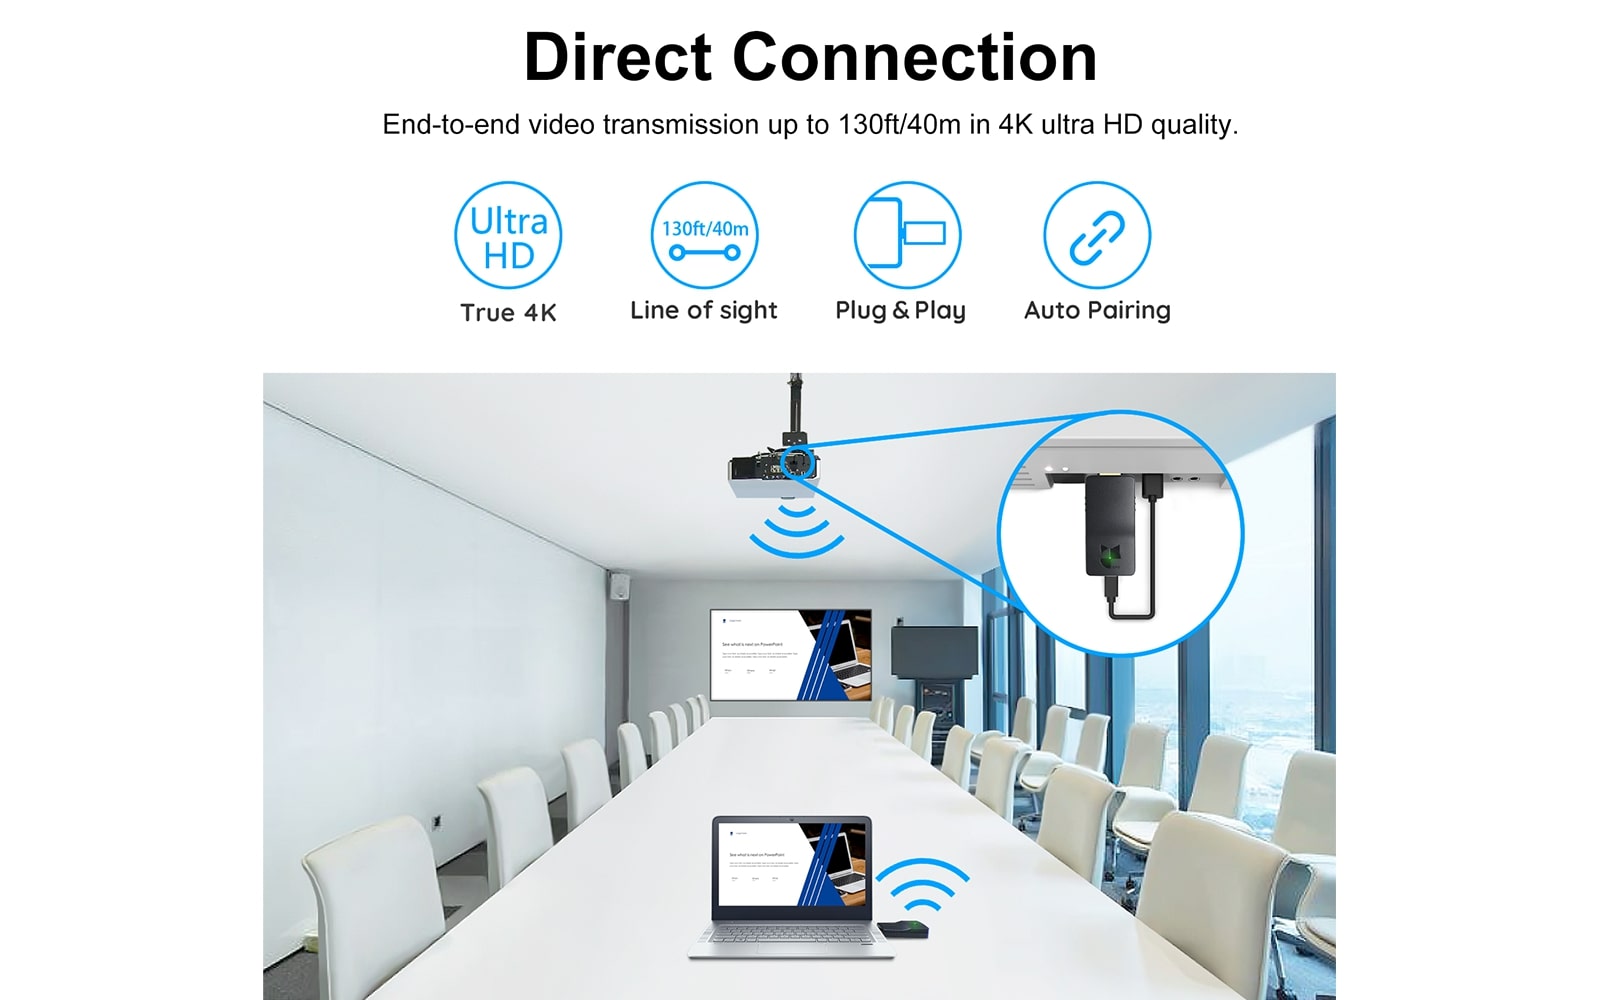 whe-20t 4k wireless hdmi extender tranmitter-direct connection